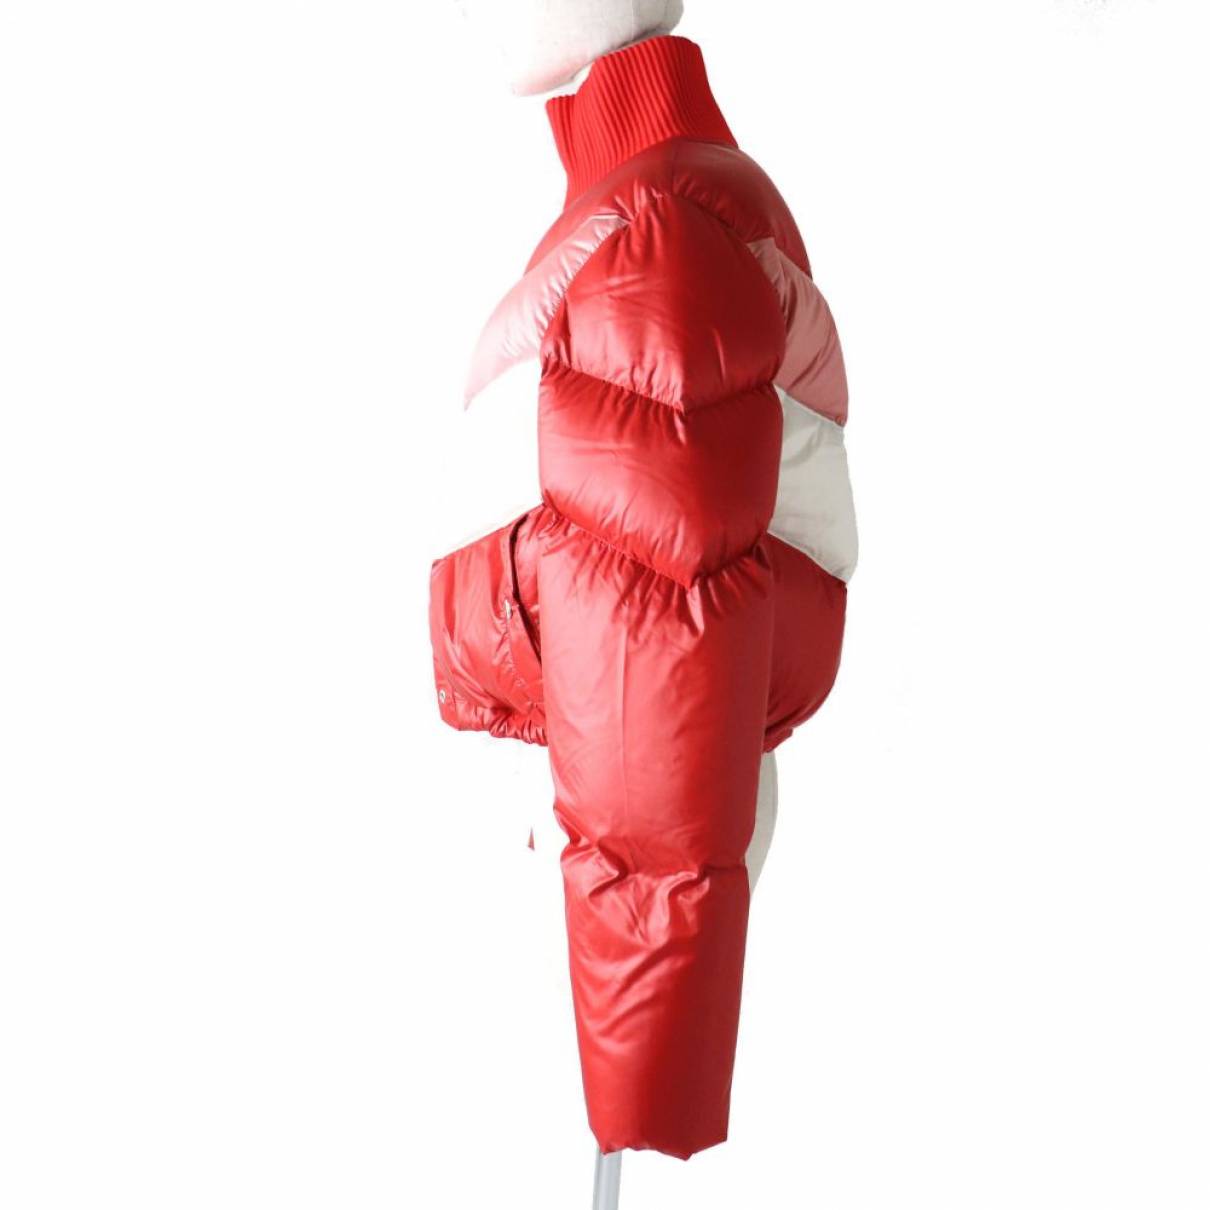 Buy Louis Vuitton 21AW Technical Mirror Puffer Jacket Technical Mirror  Puffer Down Jacket Red RM212 E70 HLB90E 50 Red from Japan - Buy authentic  Plus exclusive items from Japan